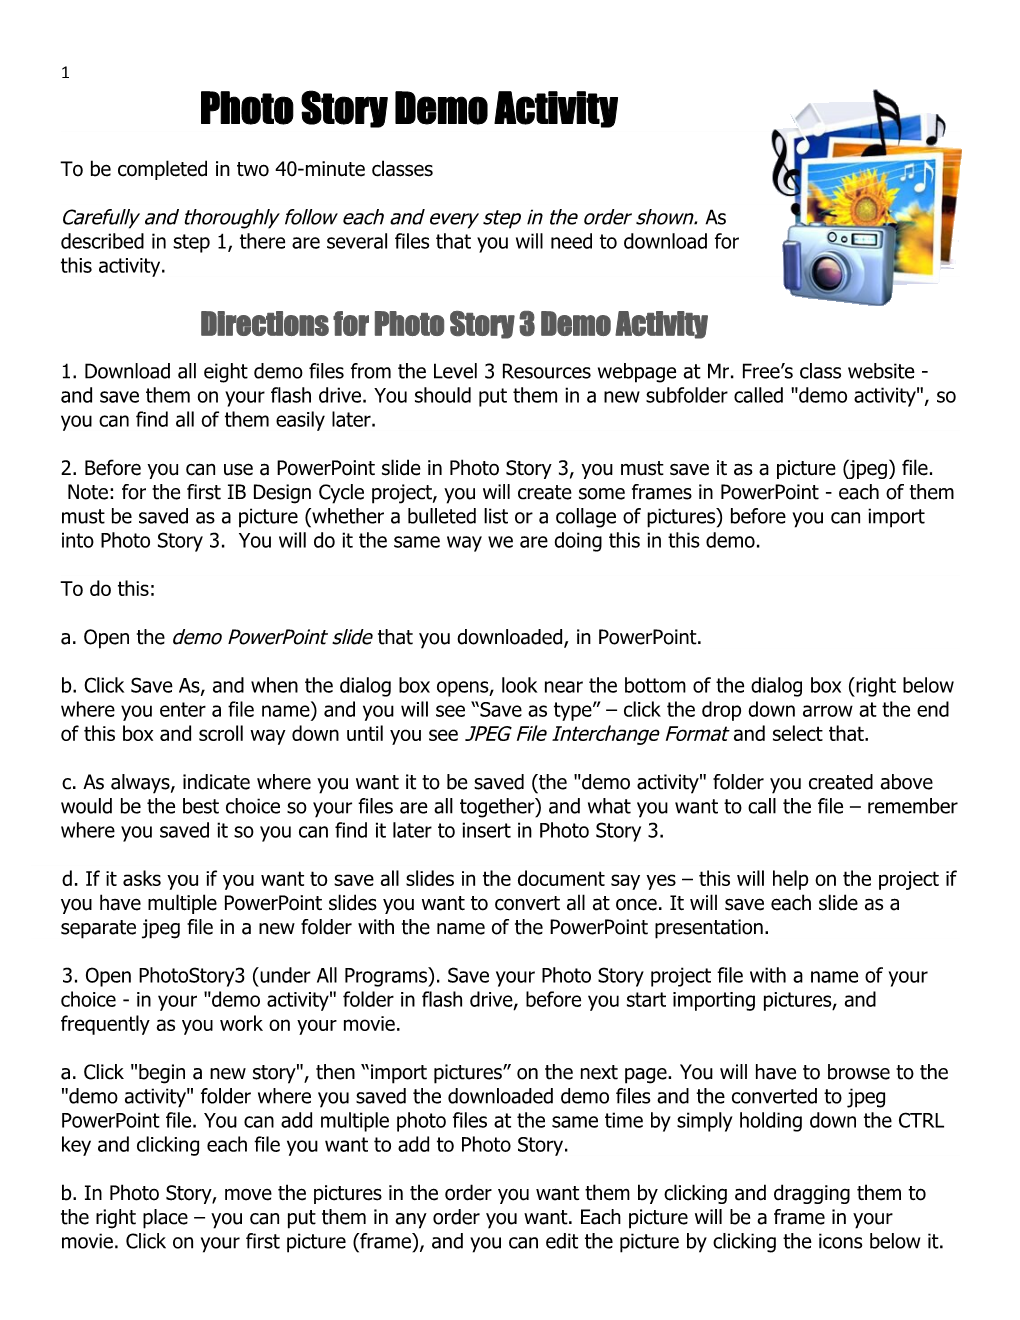 Directions for Photostory3 Demo Activity